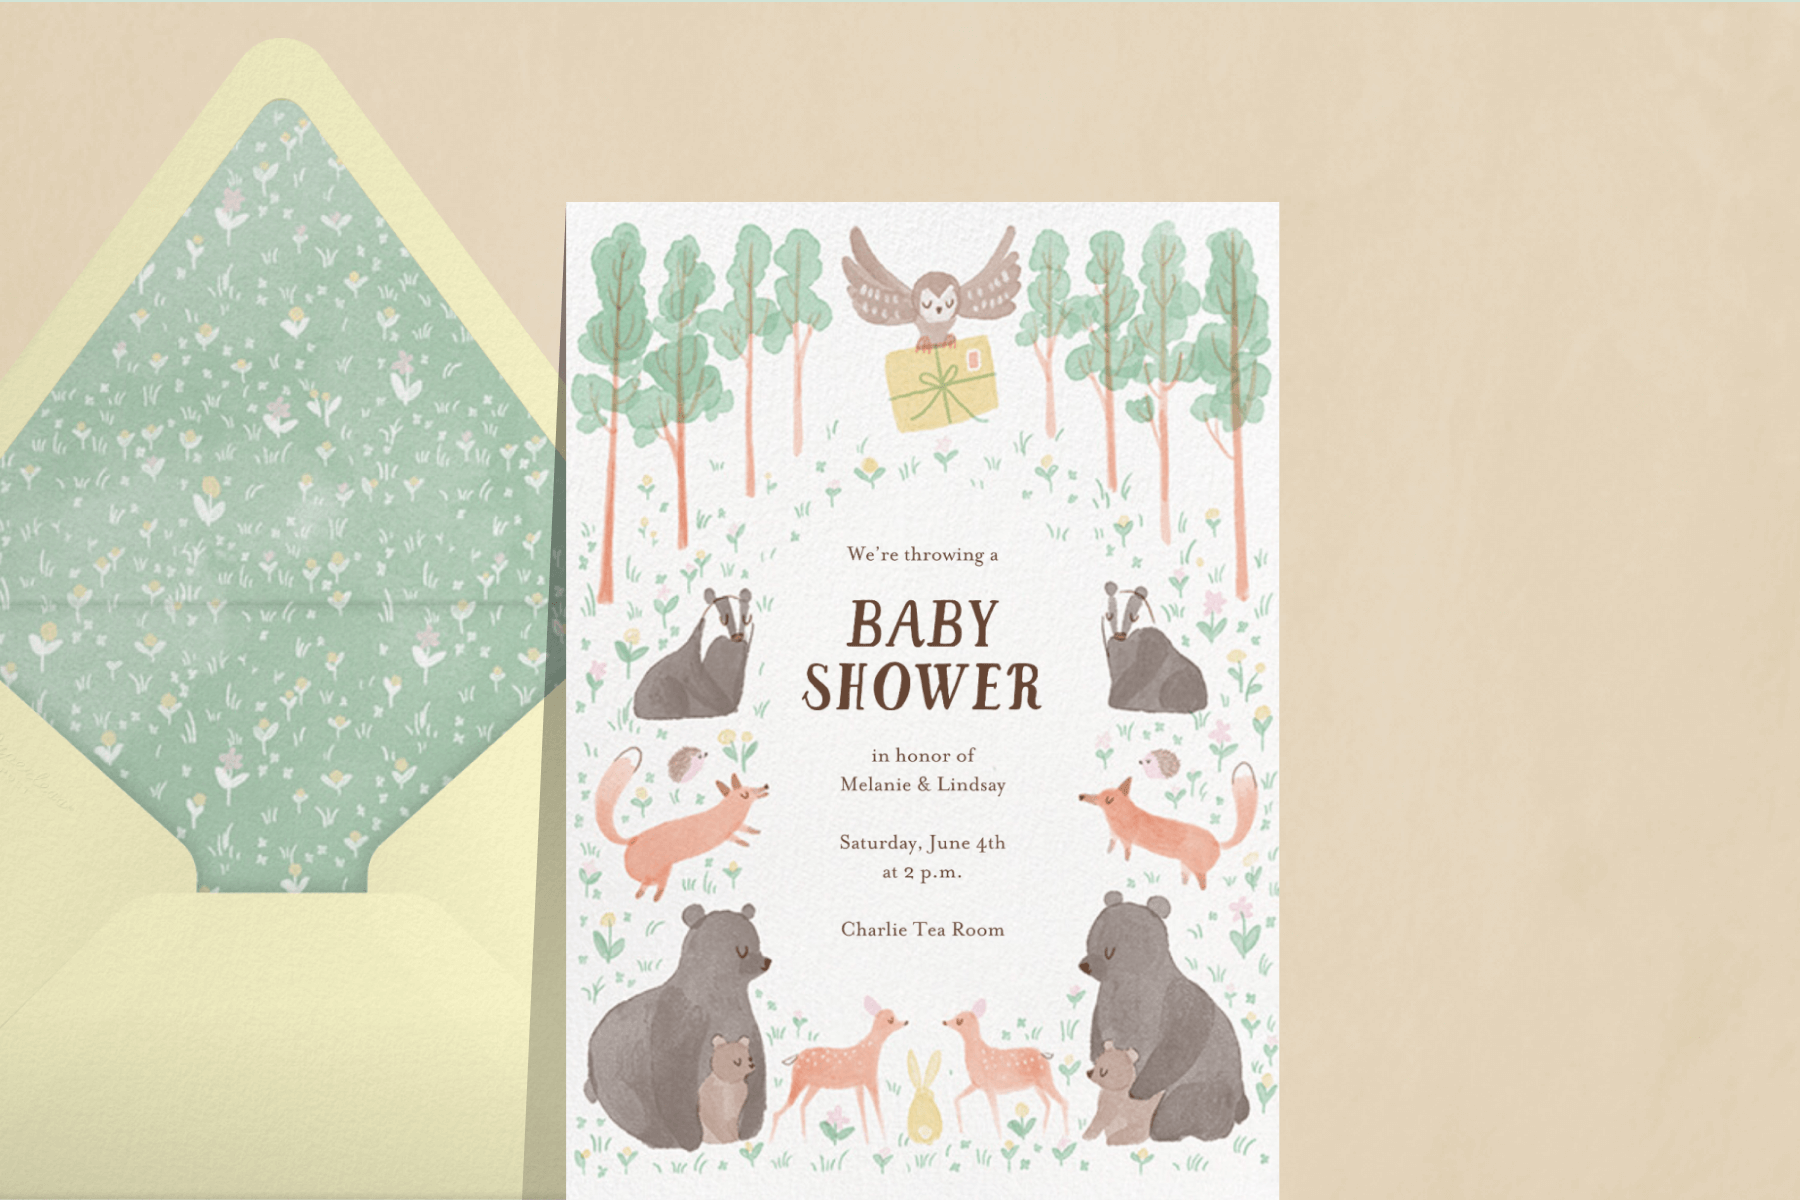 A baby shower invitation featuring woodland creatures and an owl with an invite.